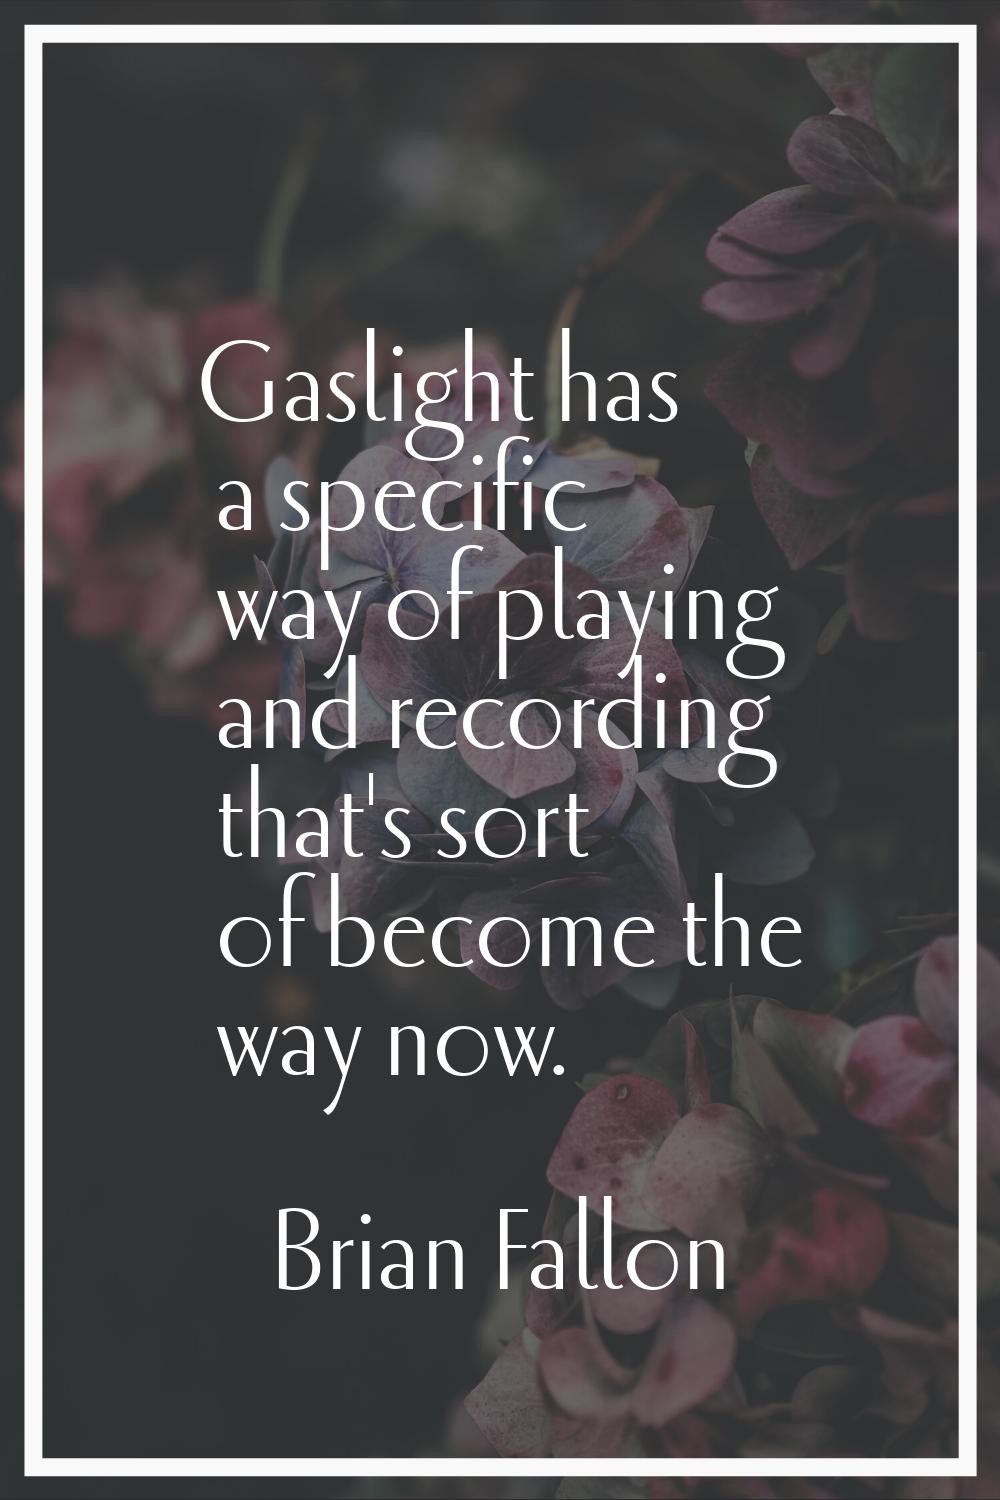 Gaslight has a specific way of playing and recording that's sort of become the way now.